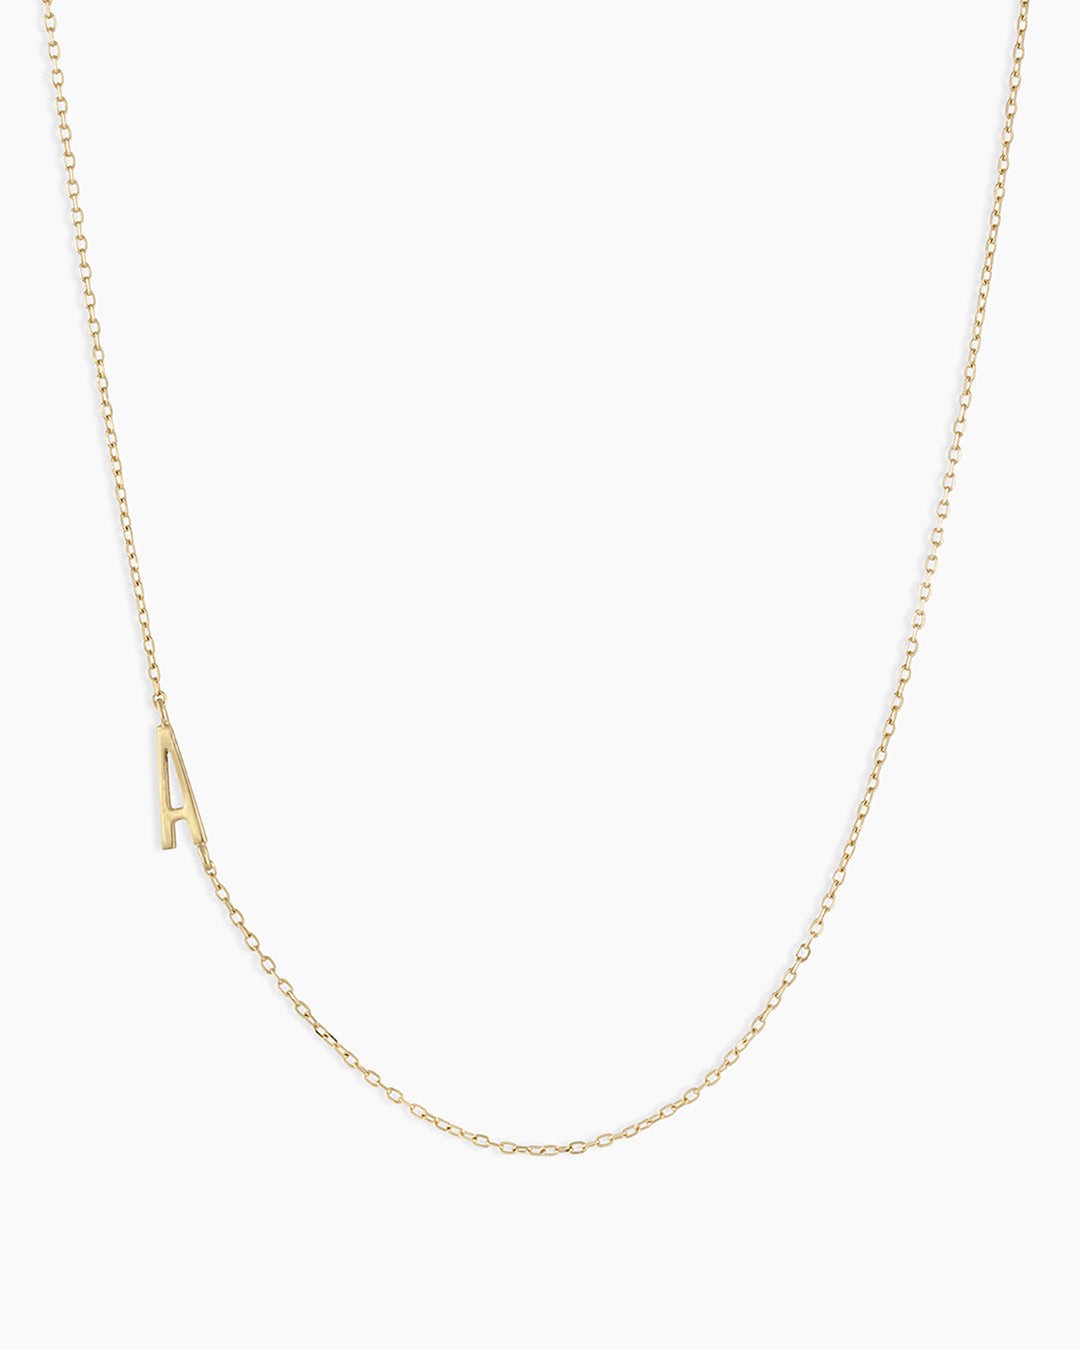 Extender Necklace in 14K Solid Gold, Women's by Gorjana